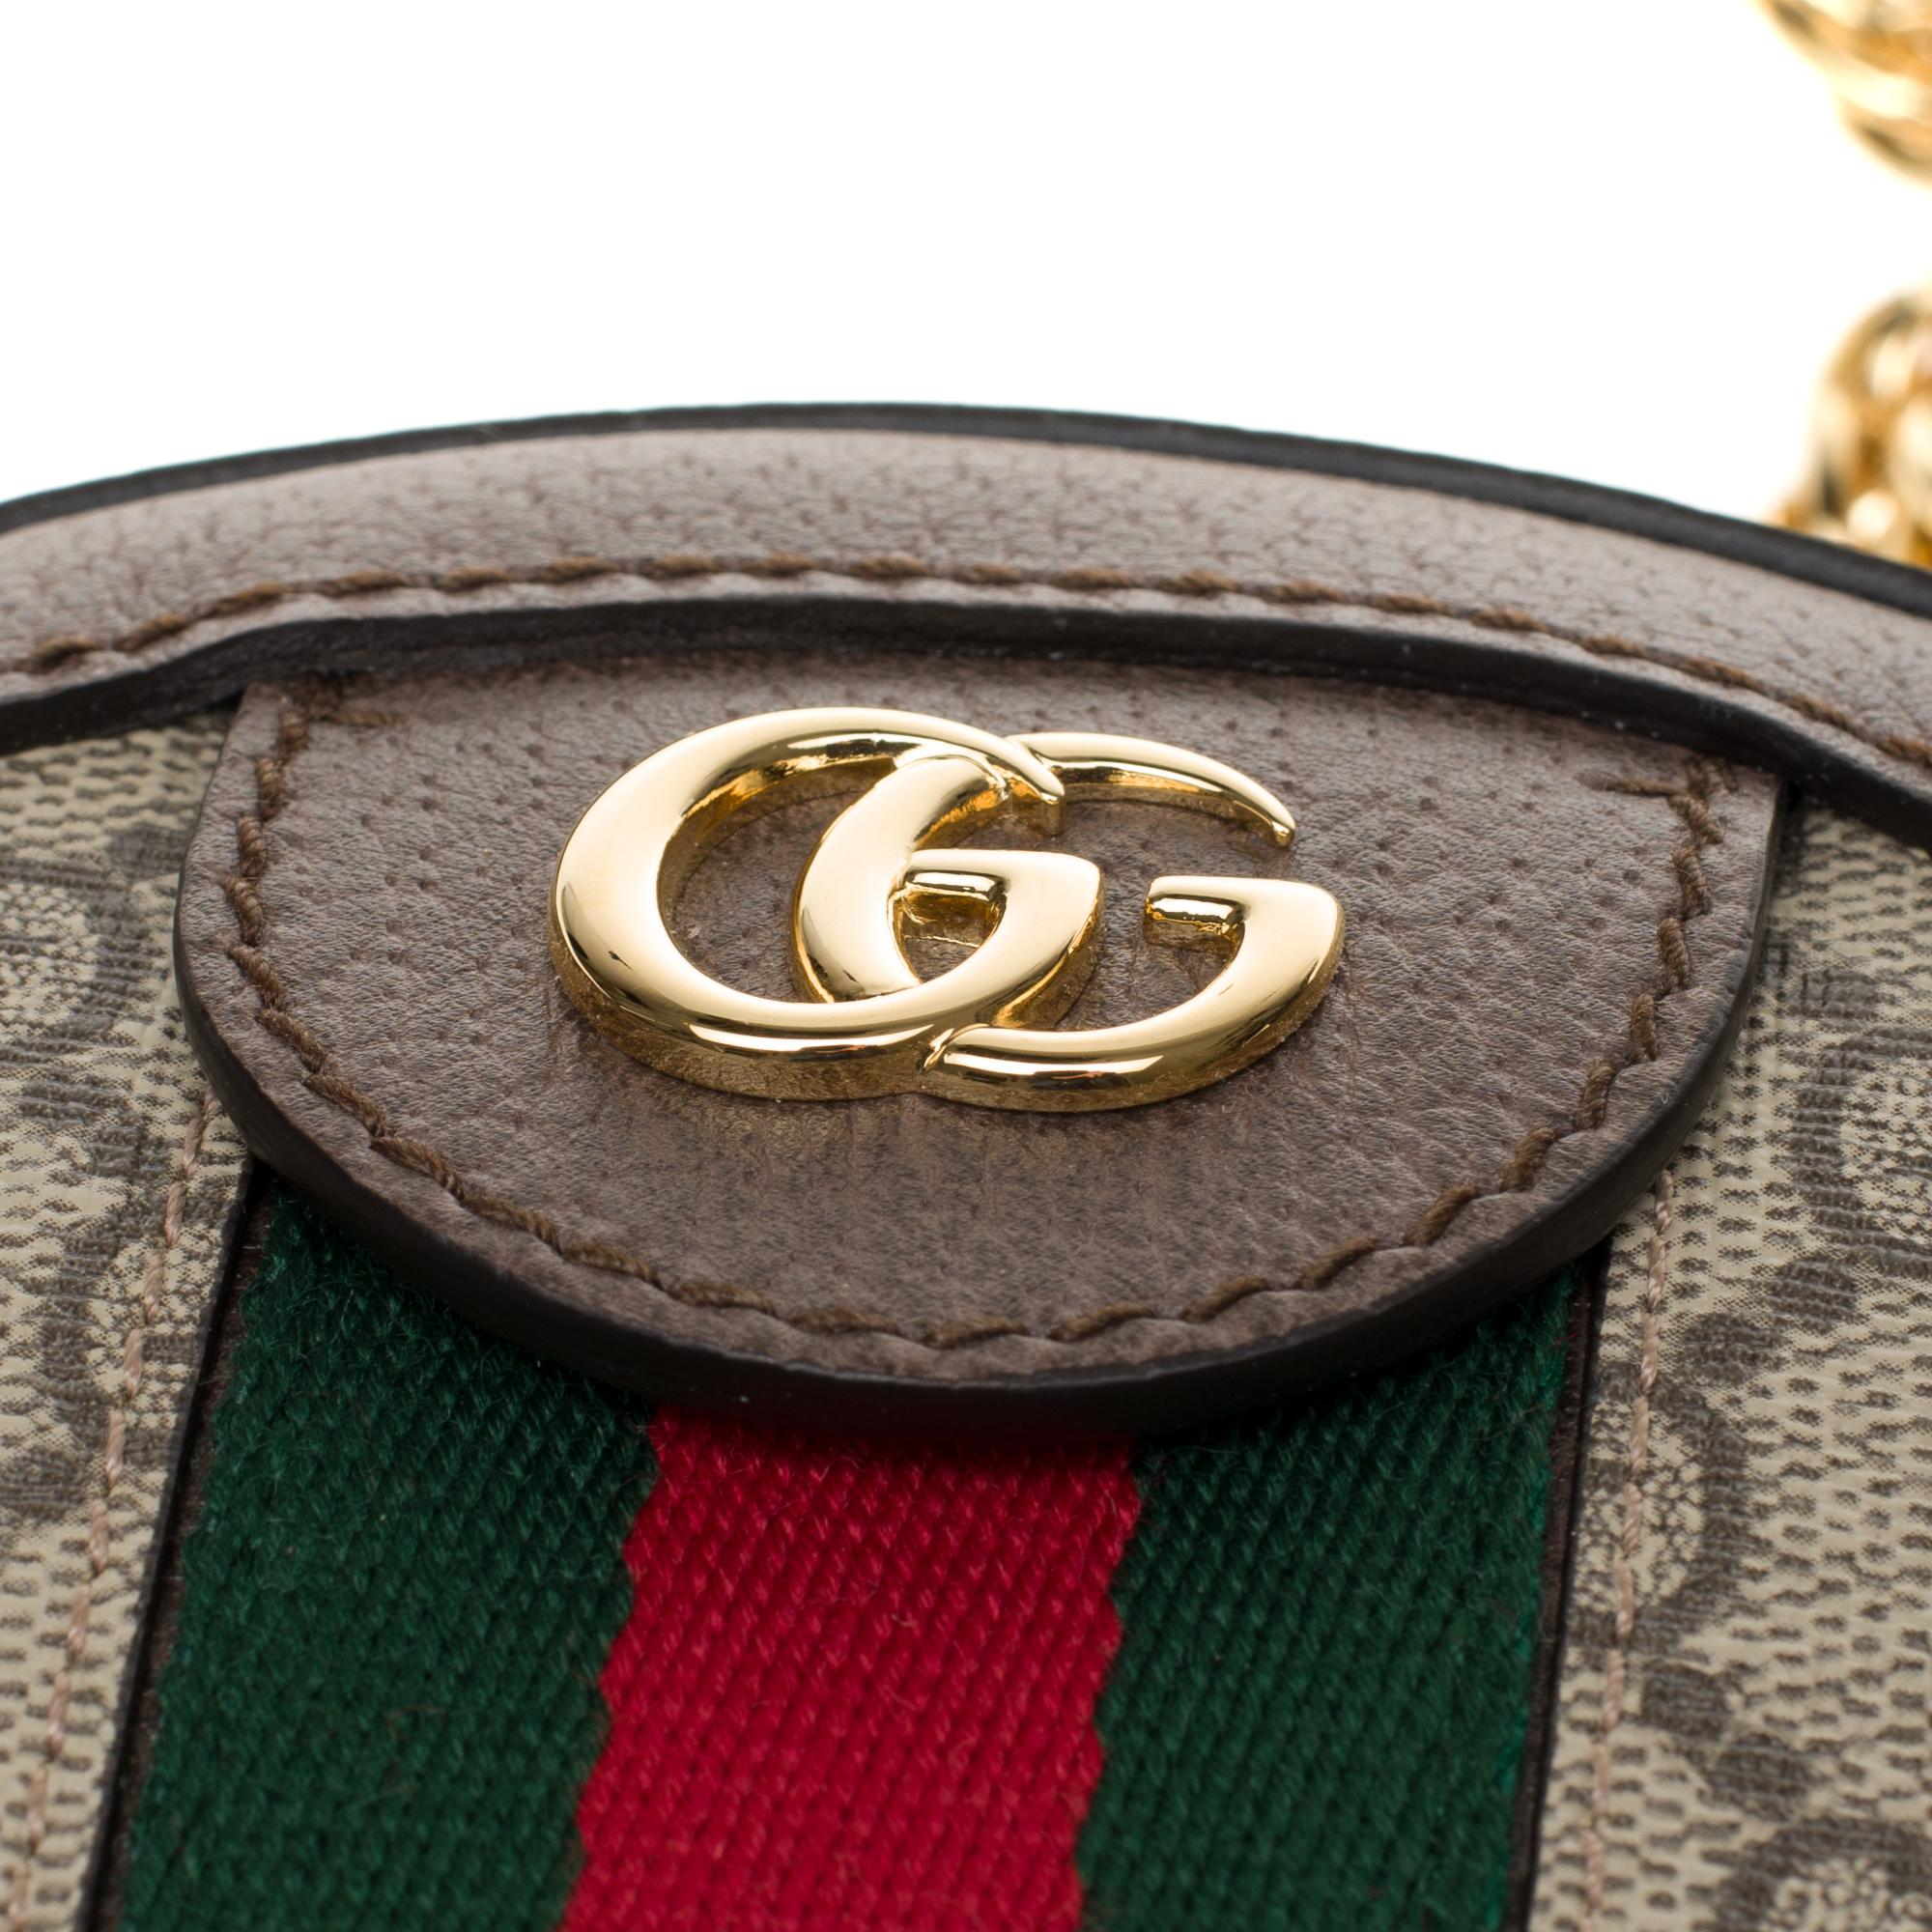 Brand New Gucci Ophidia shoulder bag in GG canvas and brown leather 8